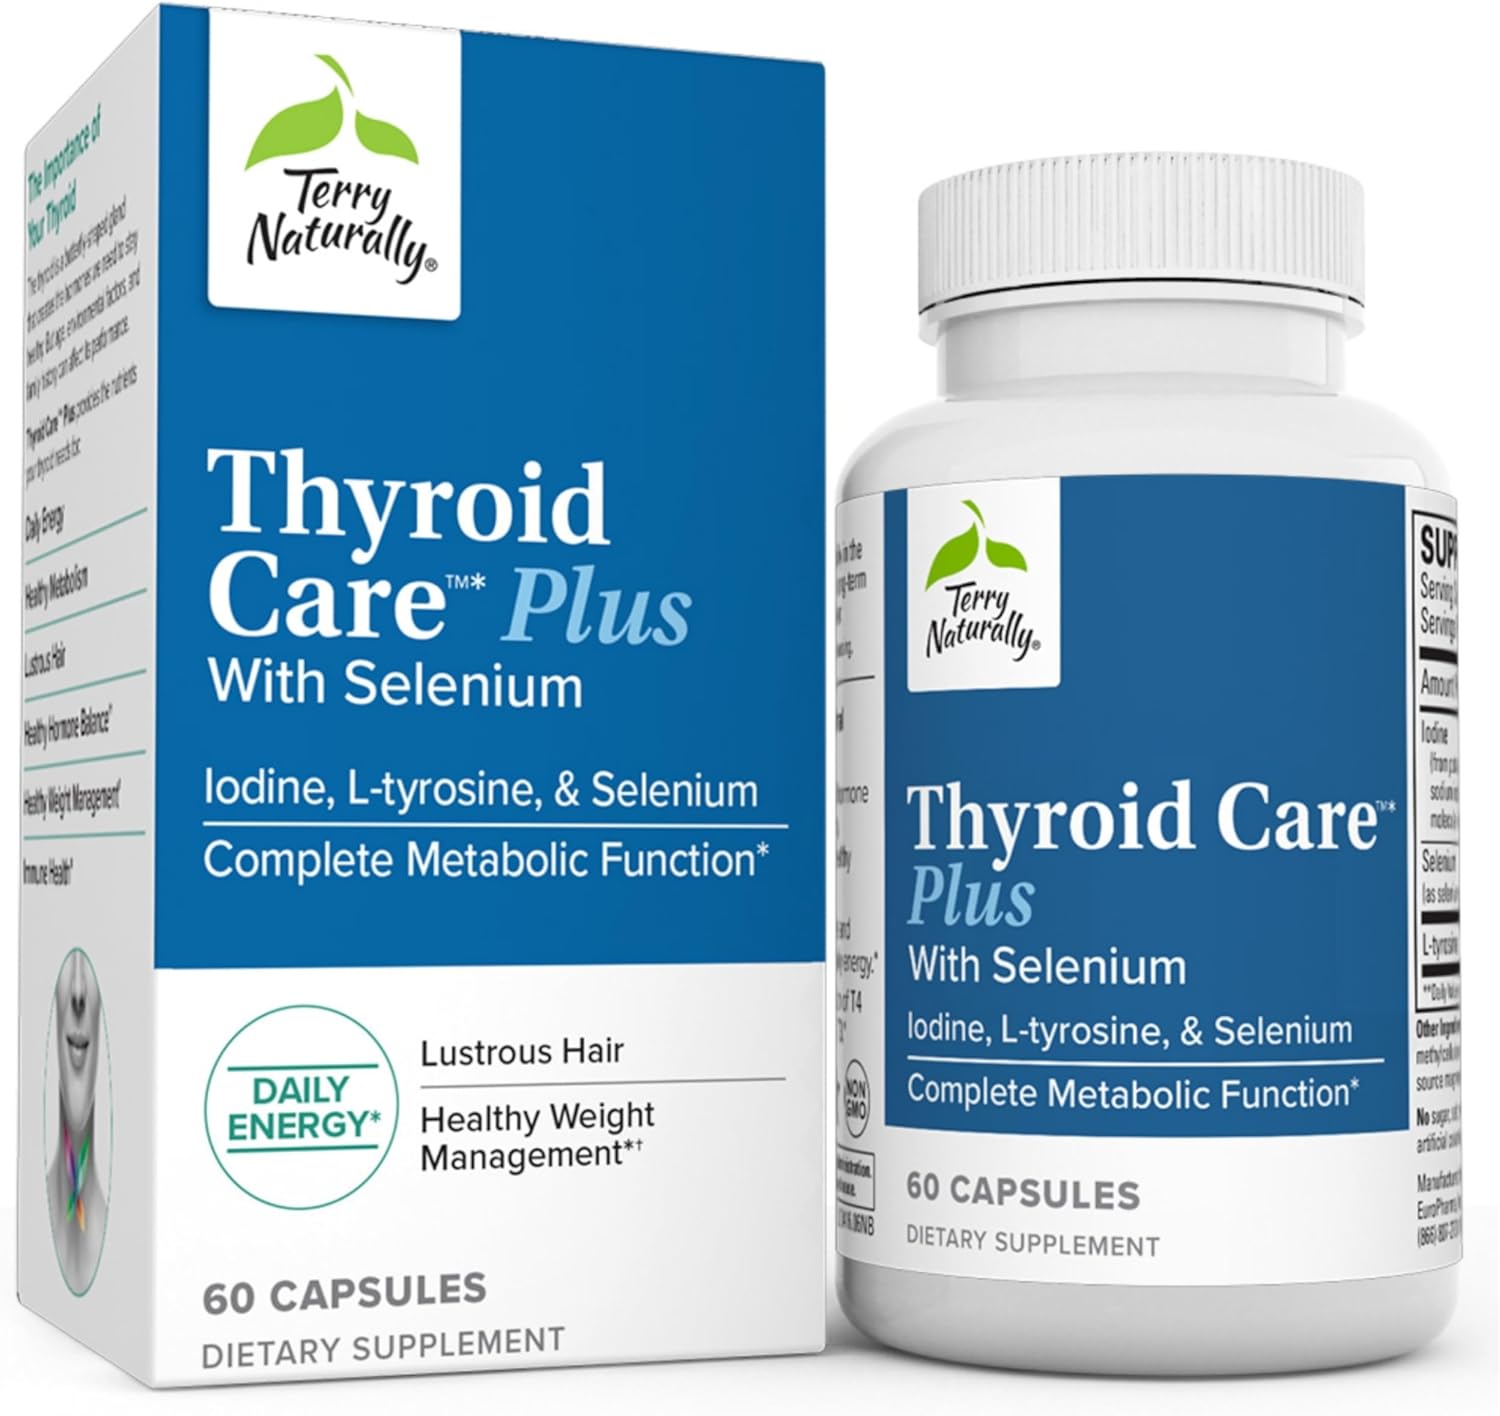 Terry Naturally Thyroid Care Plus - 60 Capsules - 